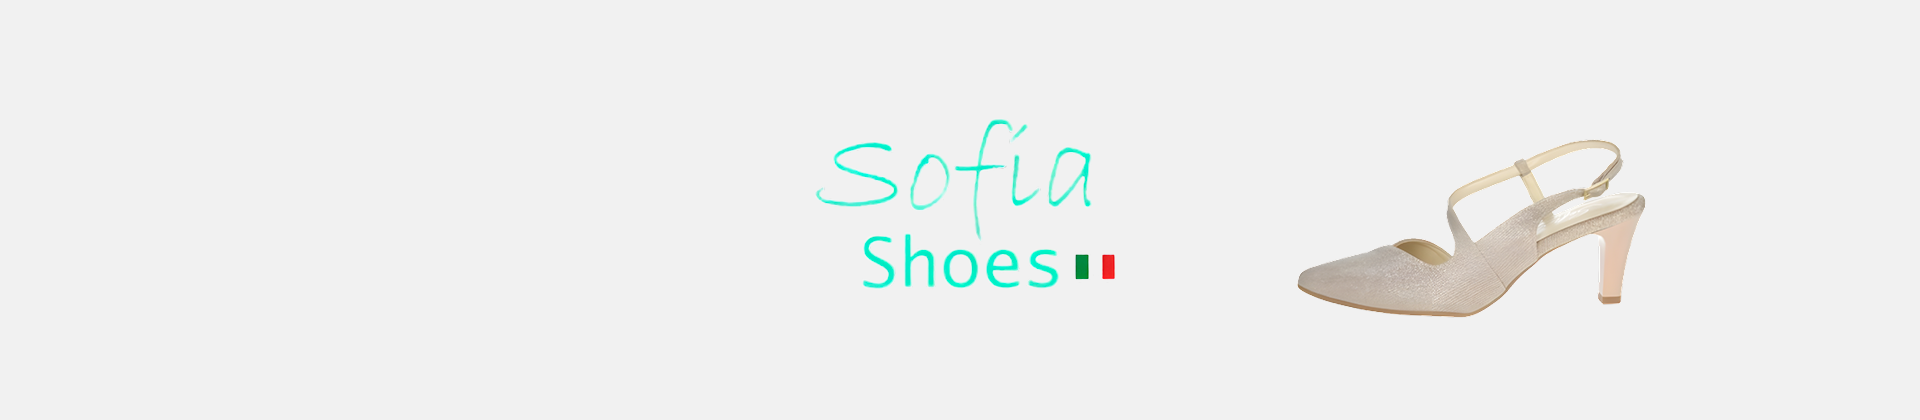 Sofia Shoes | women's sandals at affordable prices (2)